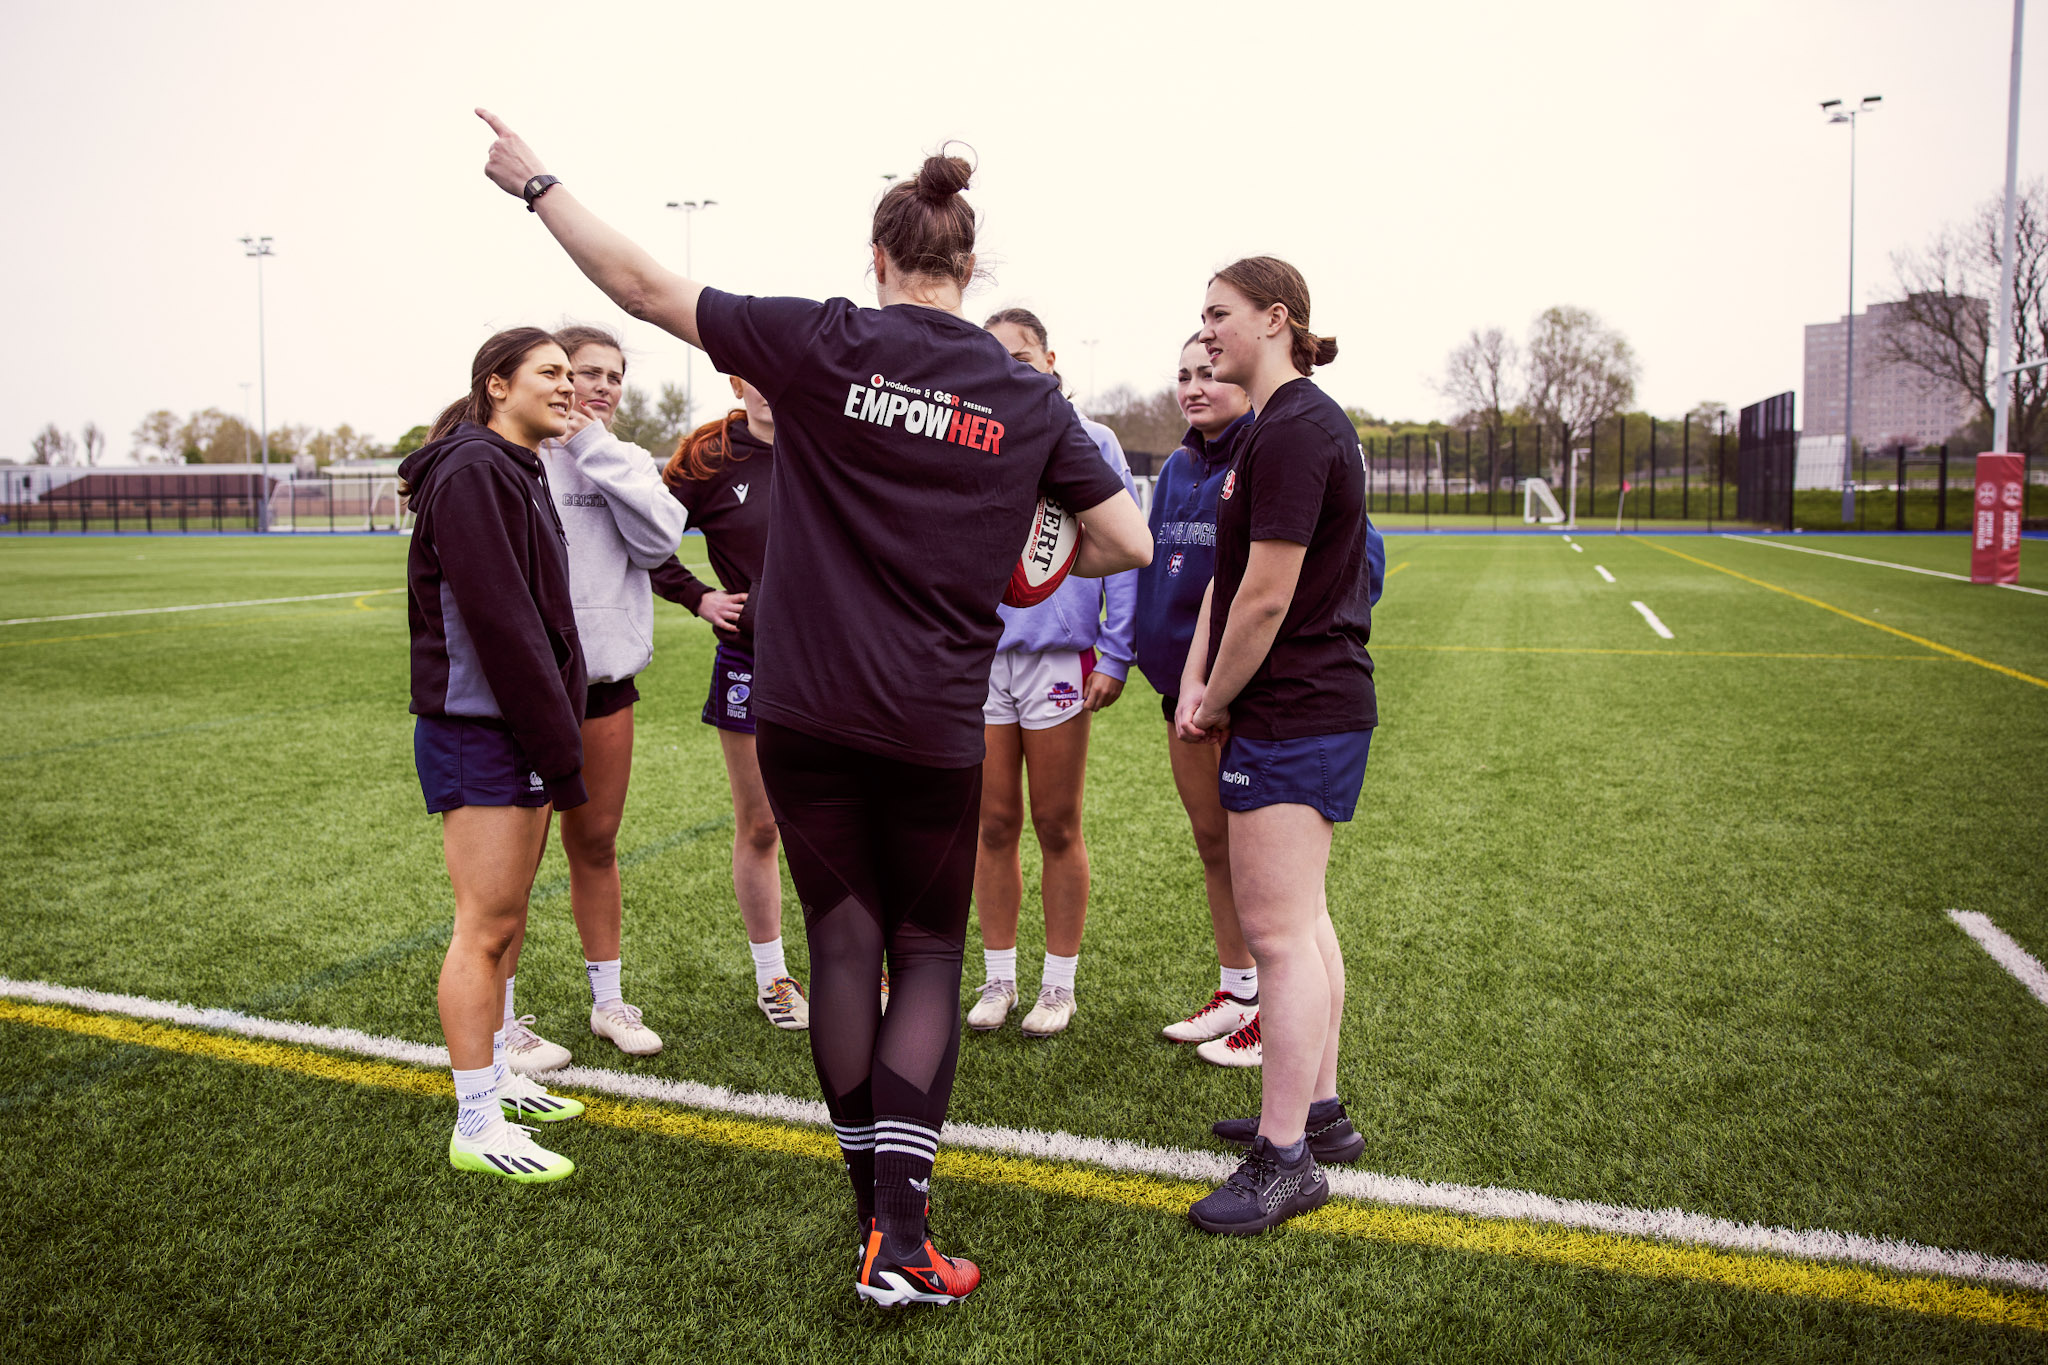 Rugby training session at The University of Edinburgh as part of the EmpowHER project, delivered by Vodafone and The Good, The Scaz & The Rugby